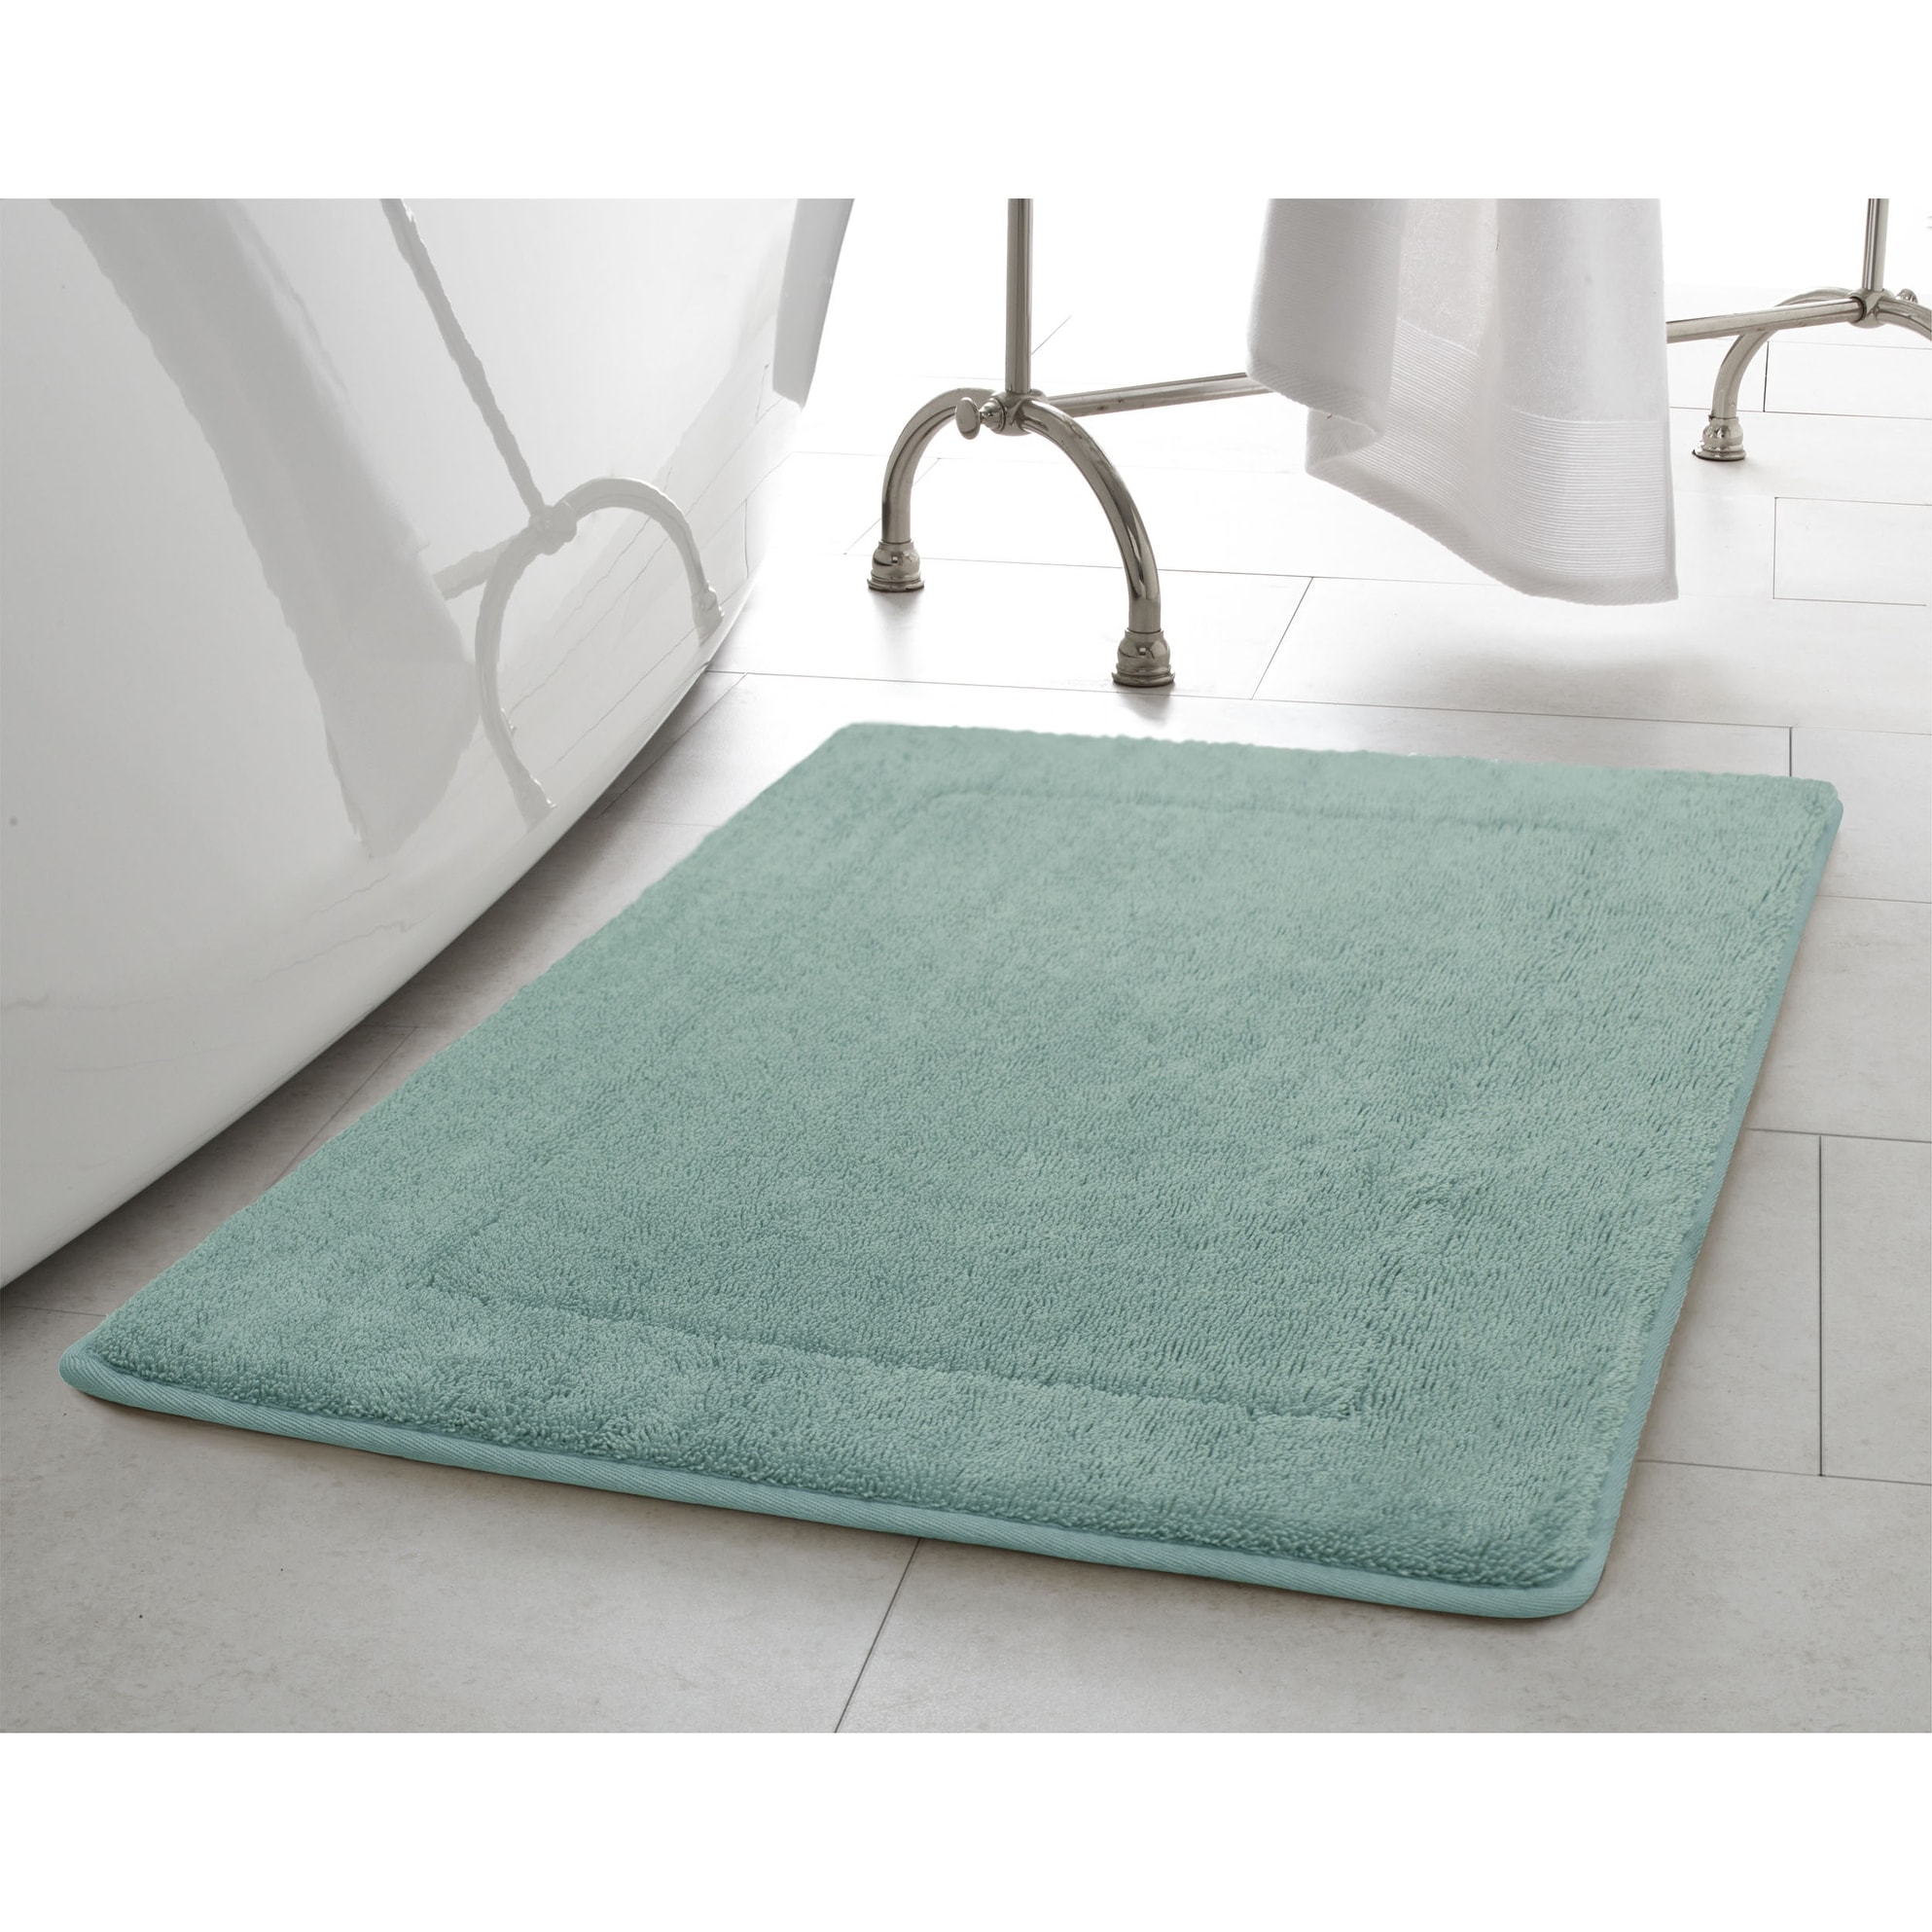 https://ak1.ostkcdn.com/images/products/is/images/direct/3ce5571a8ecc60953ae75aa1fb08644c30604a12/Oliver-Brown-Terry-Memory-Foam-Bath-Mat.jpg